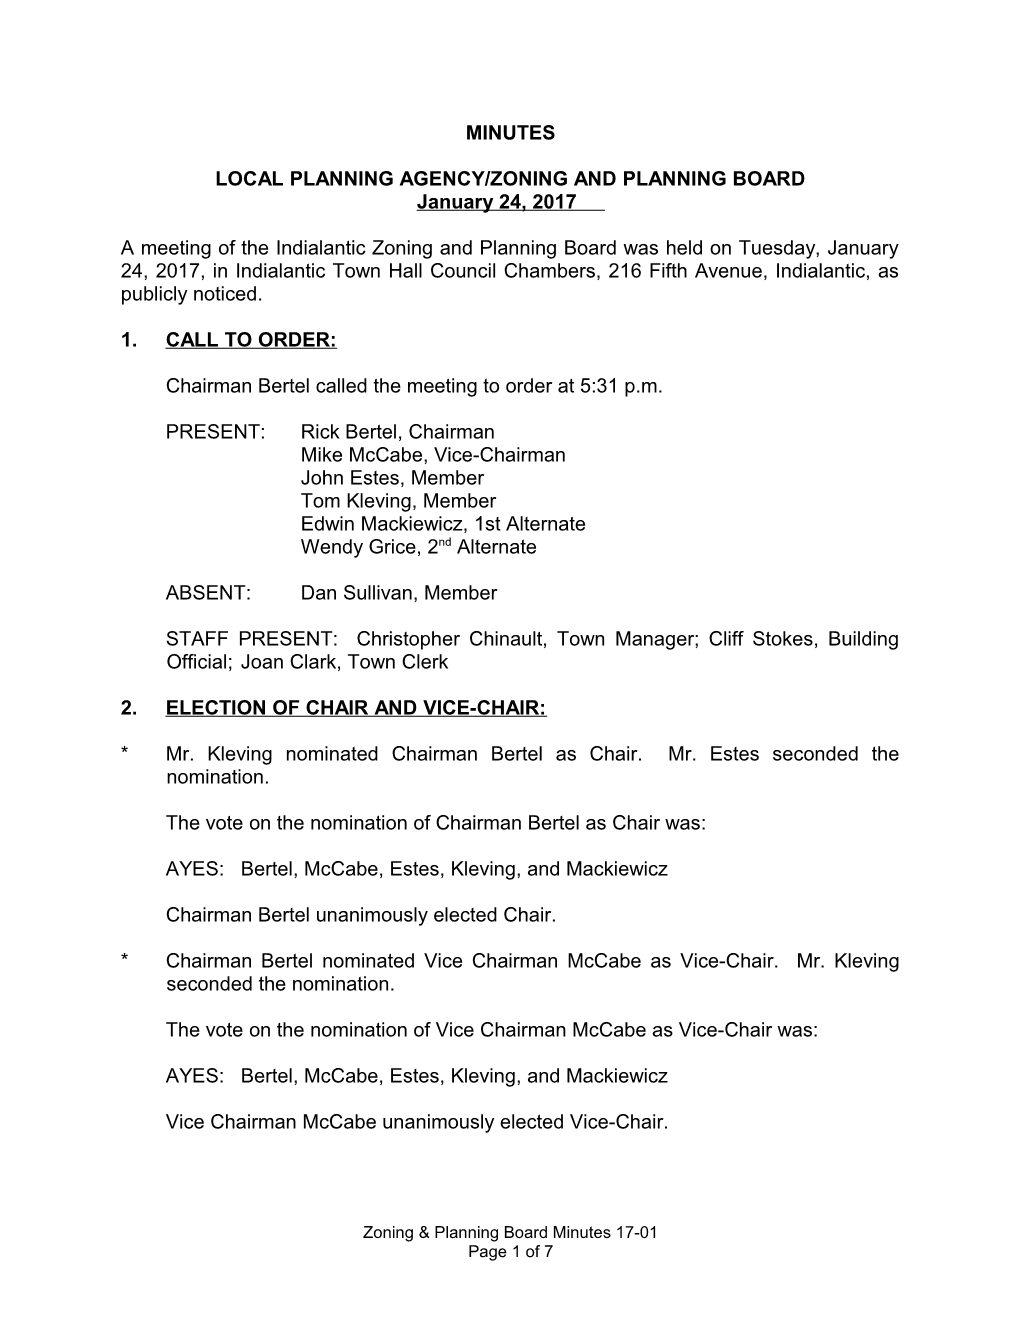 Local Planning Agency/Zoning and Planning Board